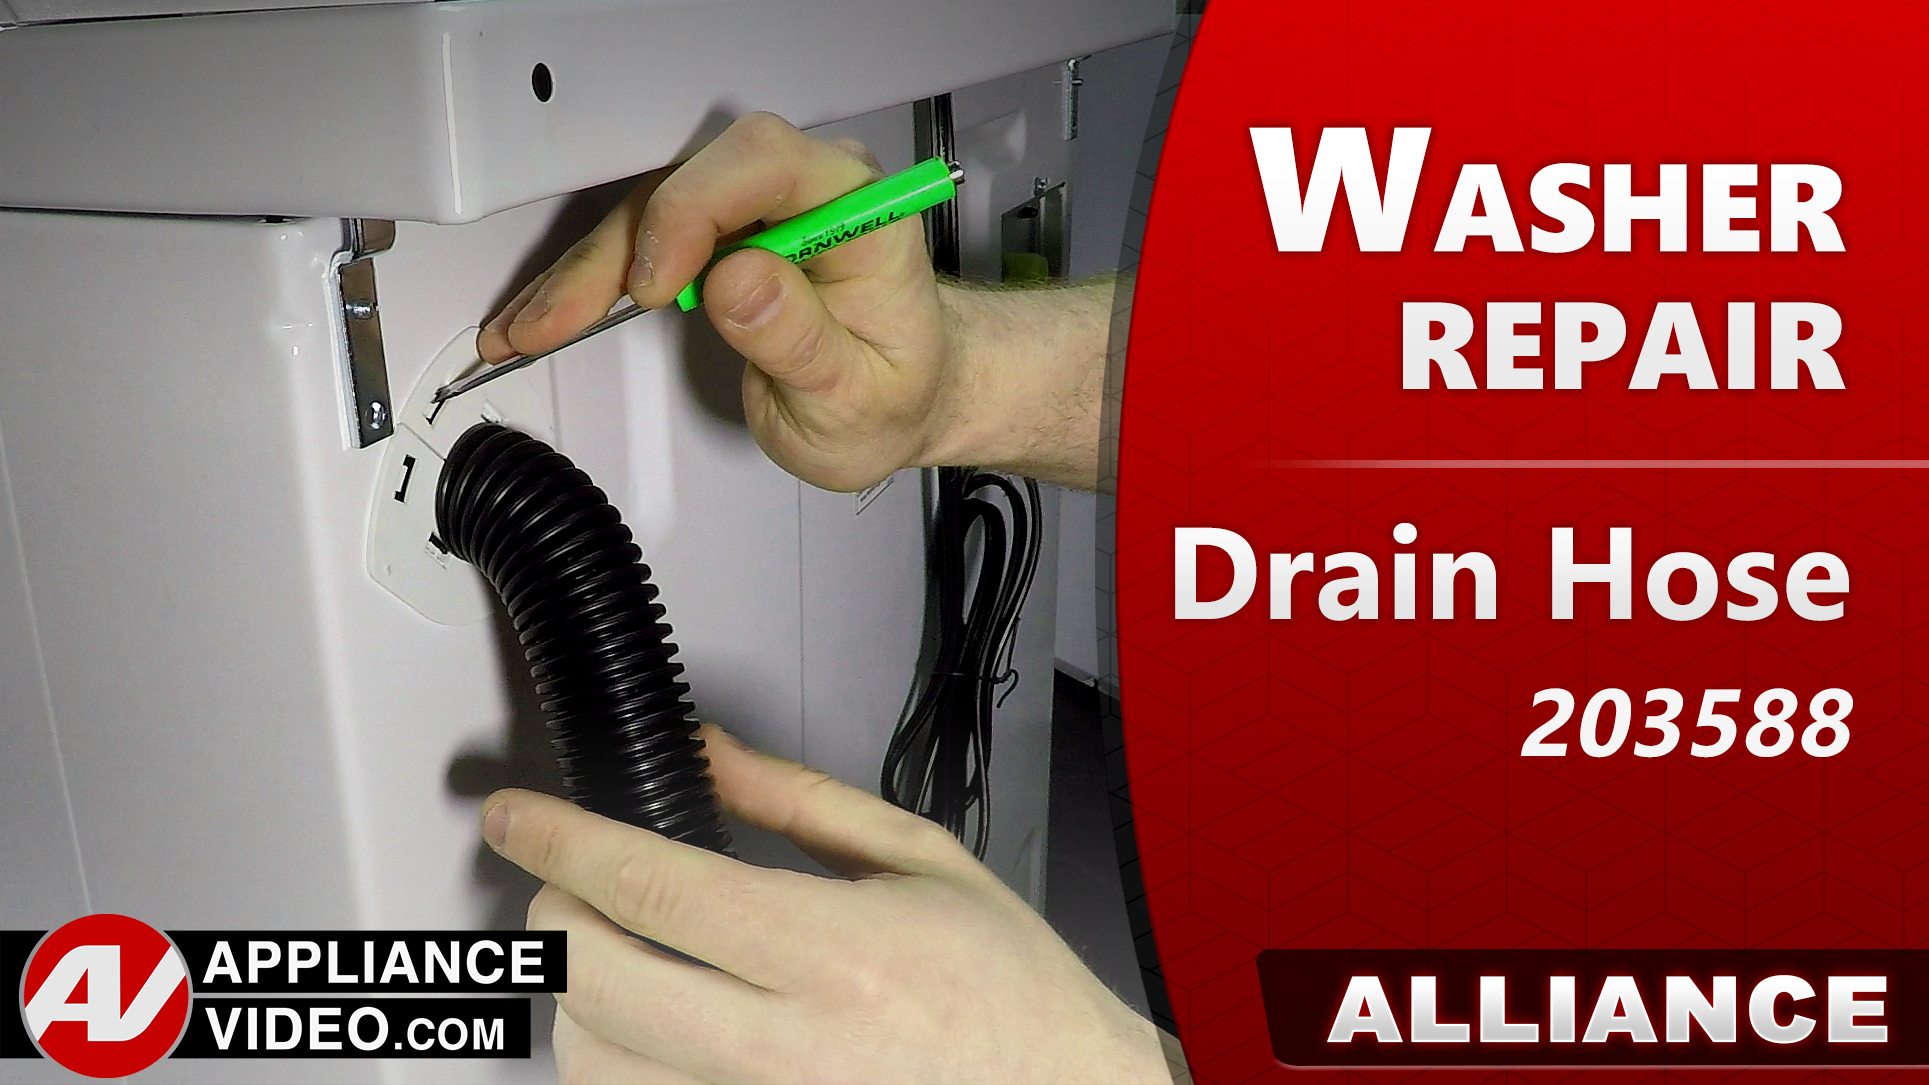 Speed Queen – Alliance AWN63RSN116TW01 Washer – Hose is damaged – Drain Hose